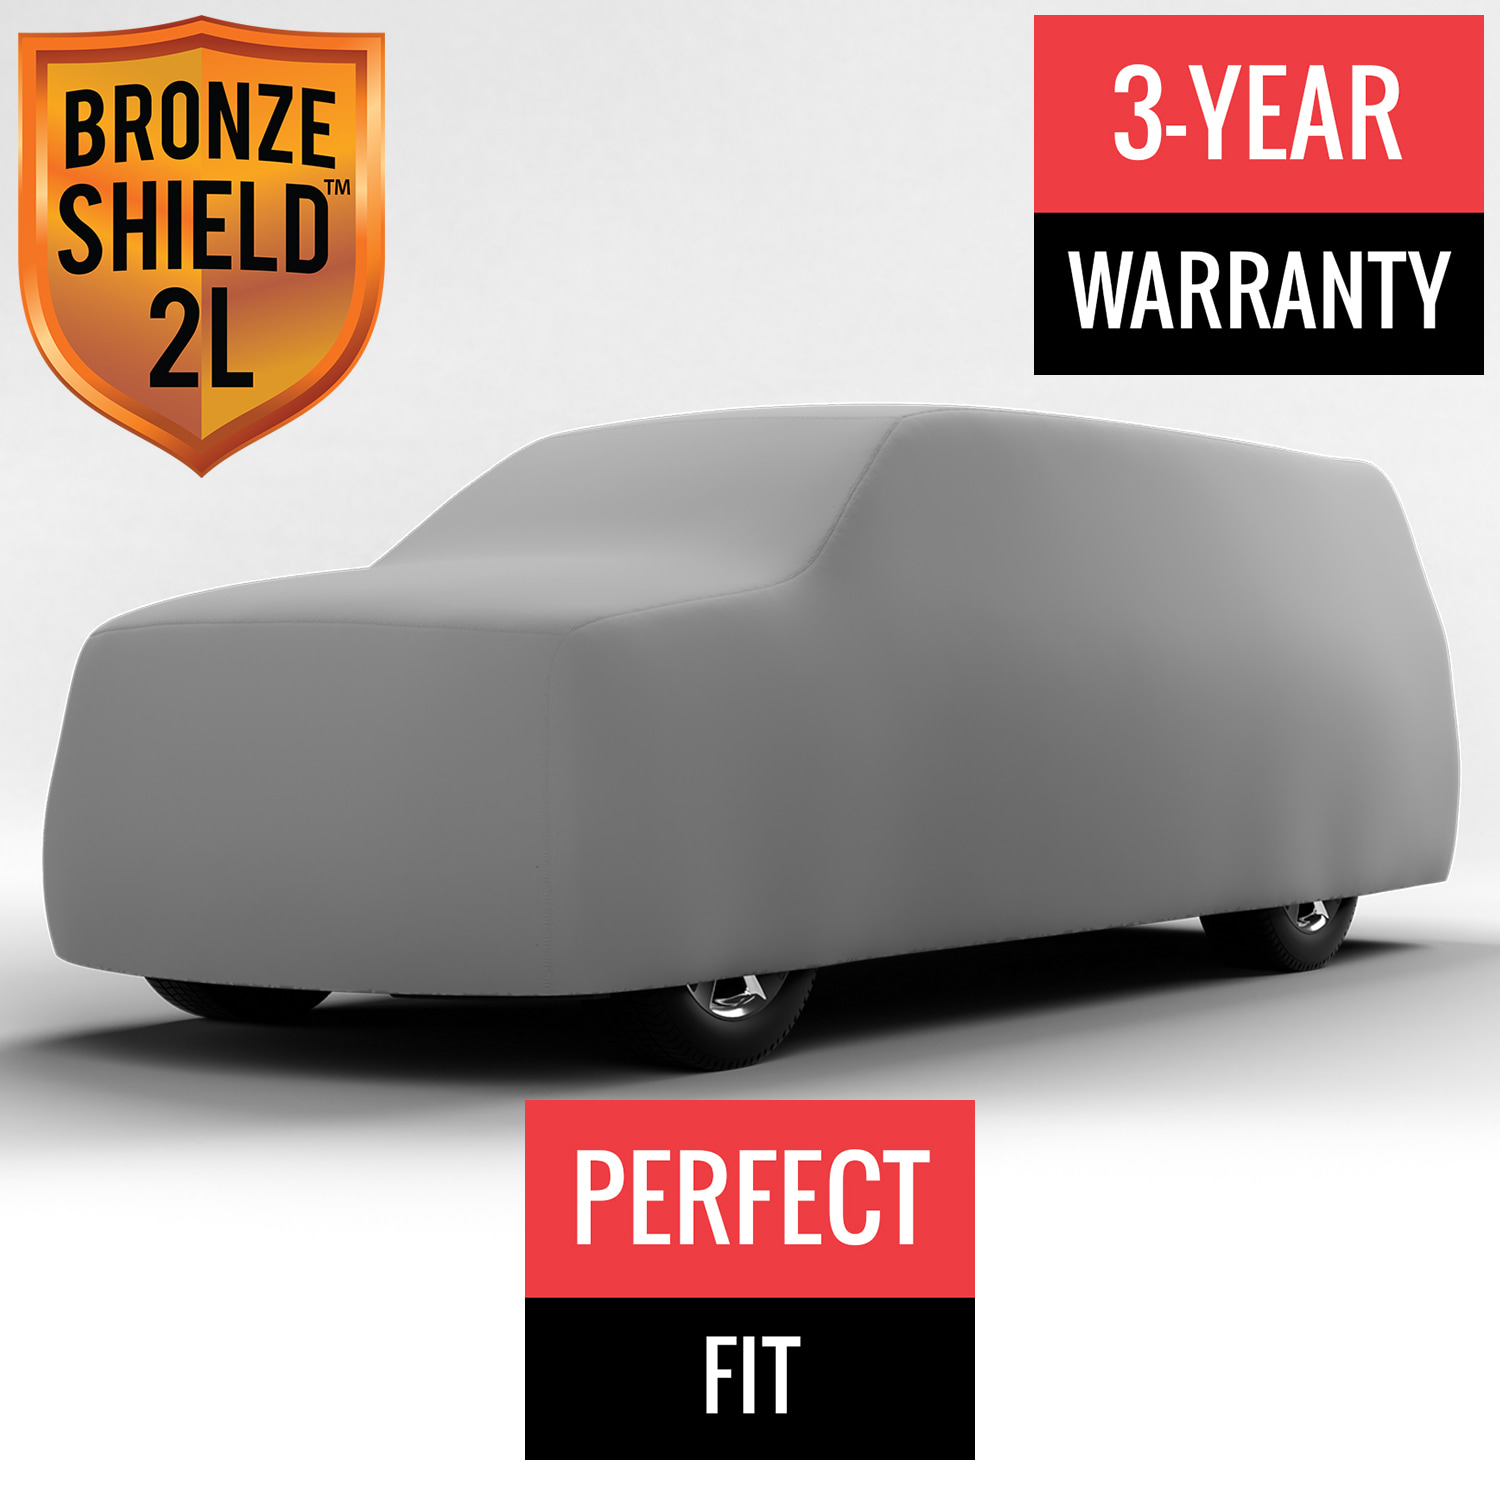 Bronze Shield 2L - Car Cover for Dodge Ram 1500 SRT-10 2006 Quad Cab Pickup 6.5 Feet Bed with Camper Shell